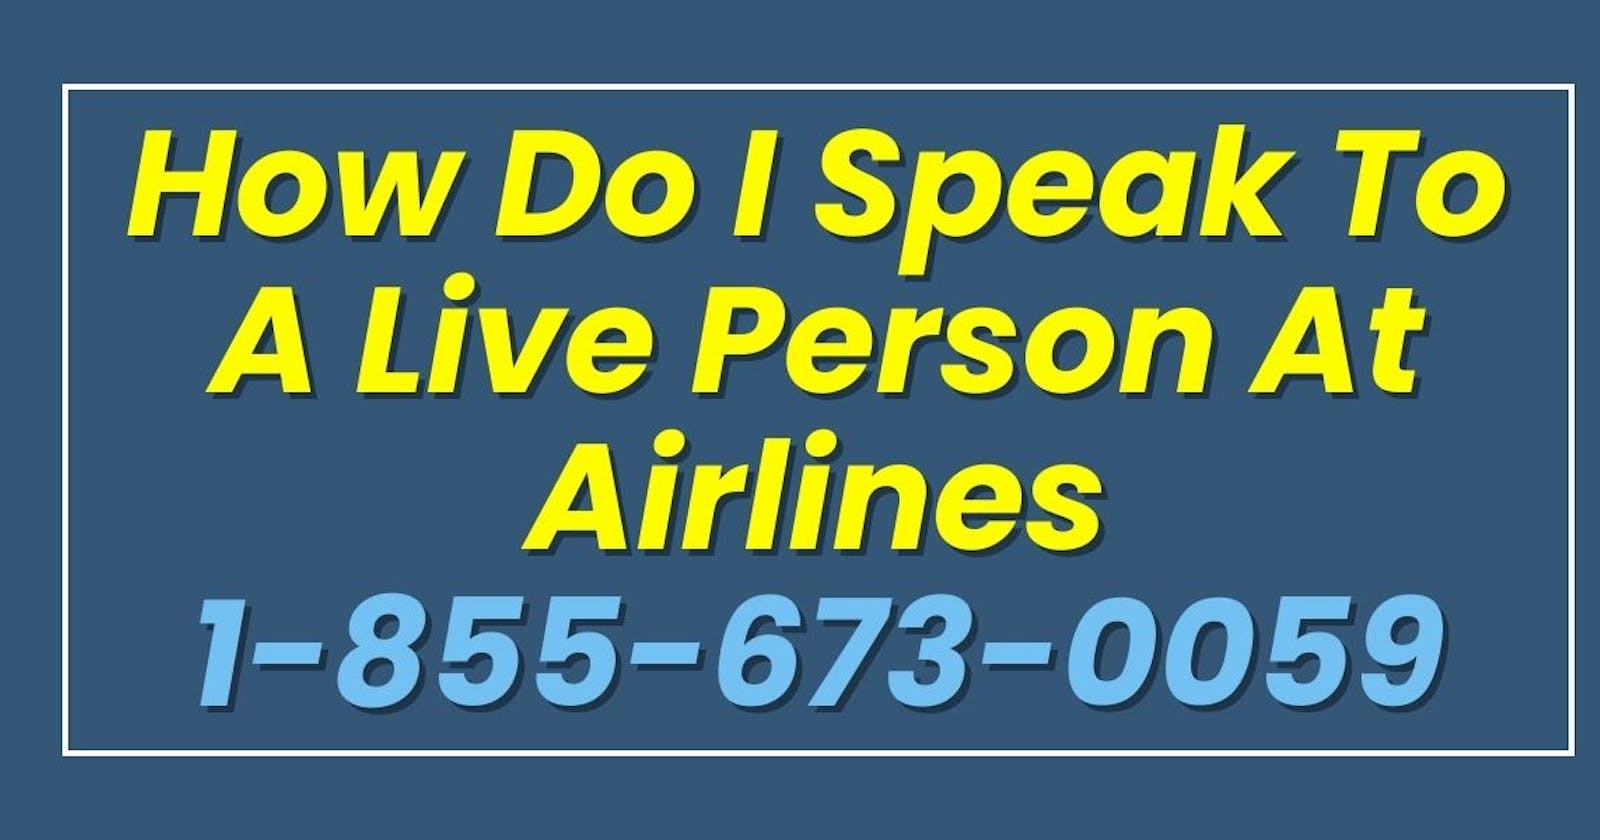 How Do I Speak to a Live Person at British Airways? | 1-855-673-0059(No wait) or +1866-484-0988